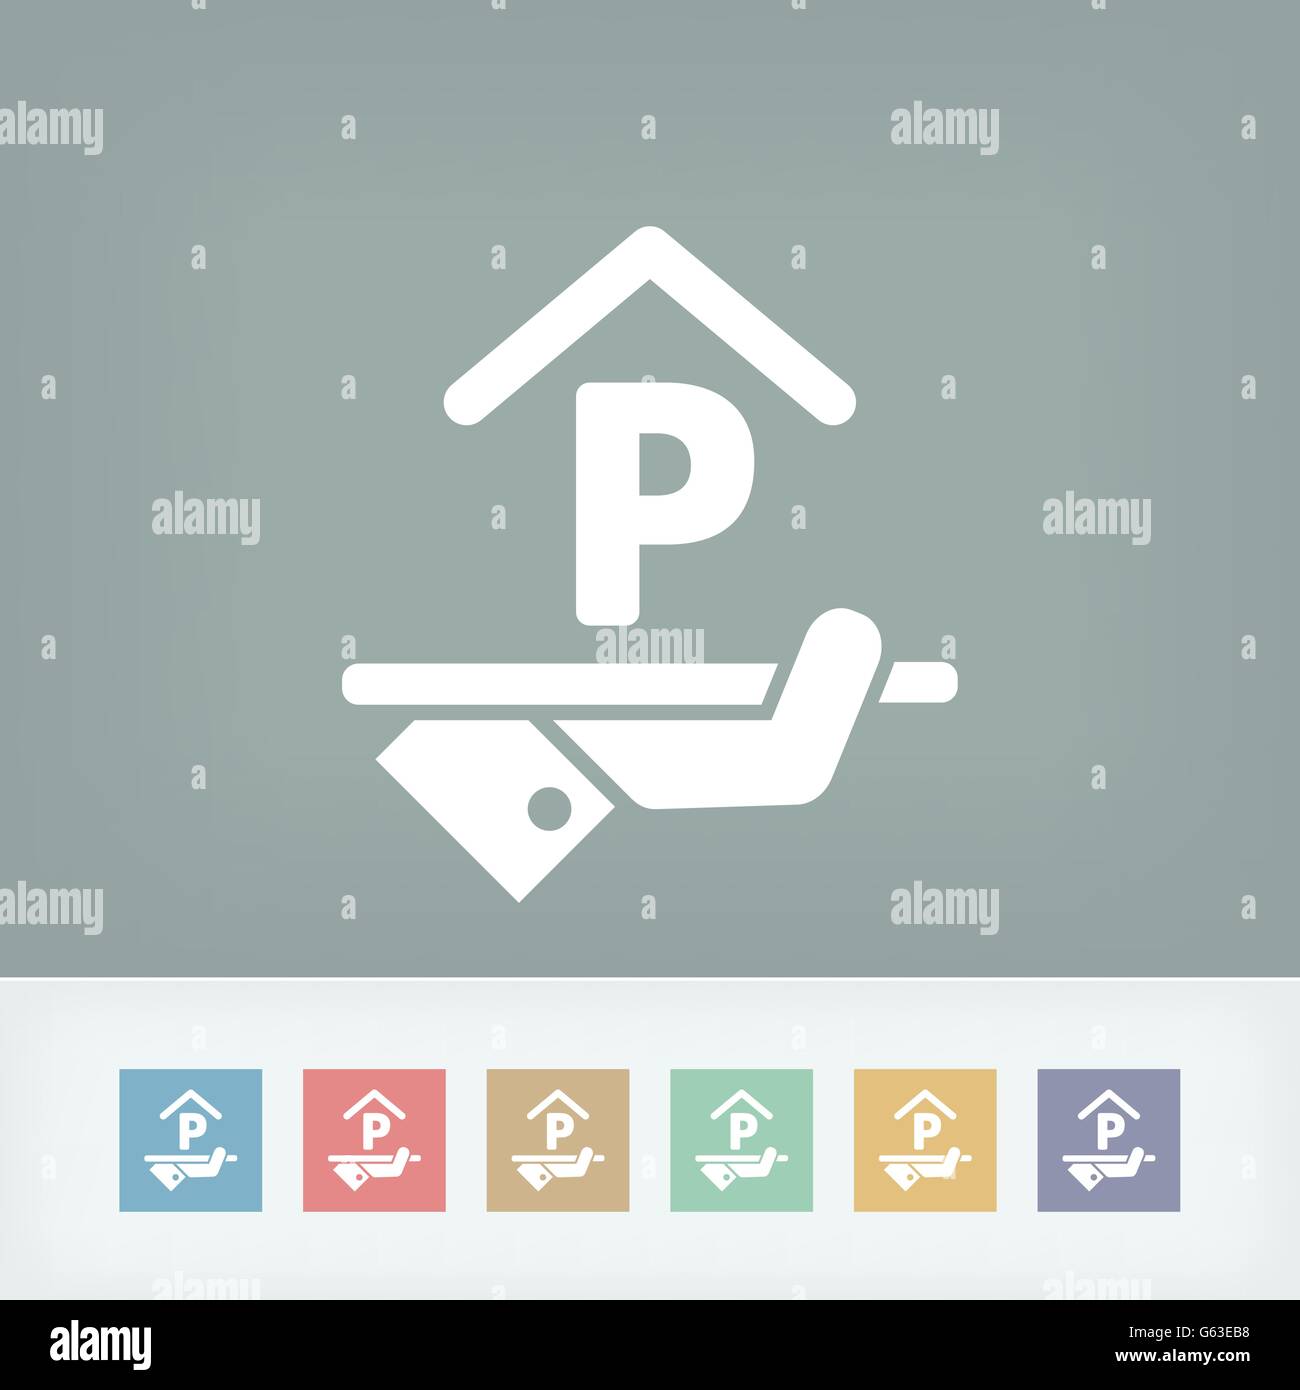 Hotel icon. Parking. Stock Vector